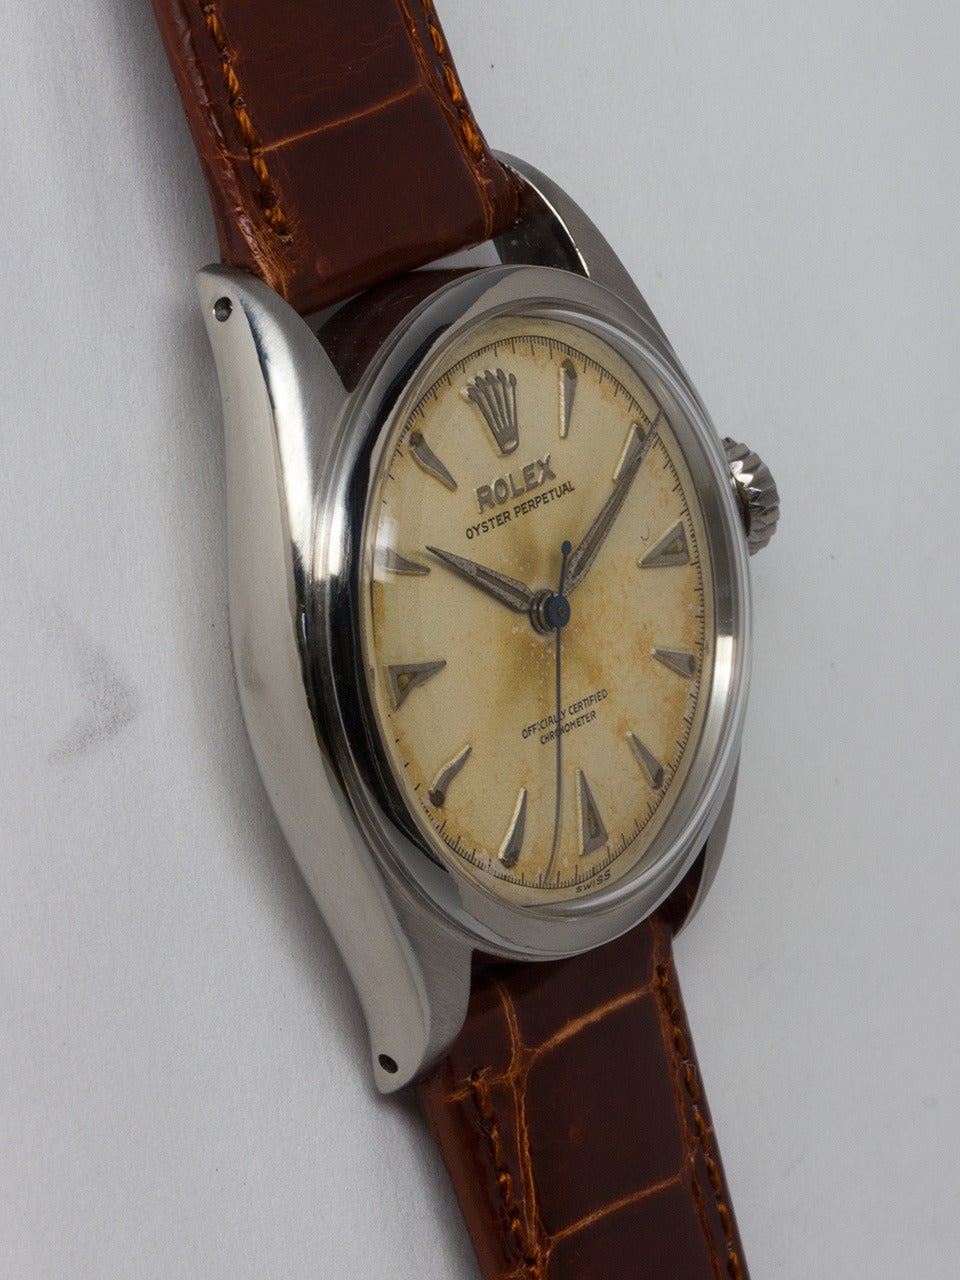 Rolex stainless steel Oyster Perpetual wristwatch, ref 6084, serial# 913,xxx circa 1953. 34mm diameter case with dome bezel and acrylic crystal. Very pleasing original antique white dial with raised silver arrowhead indexes with patina'd luminous